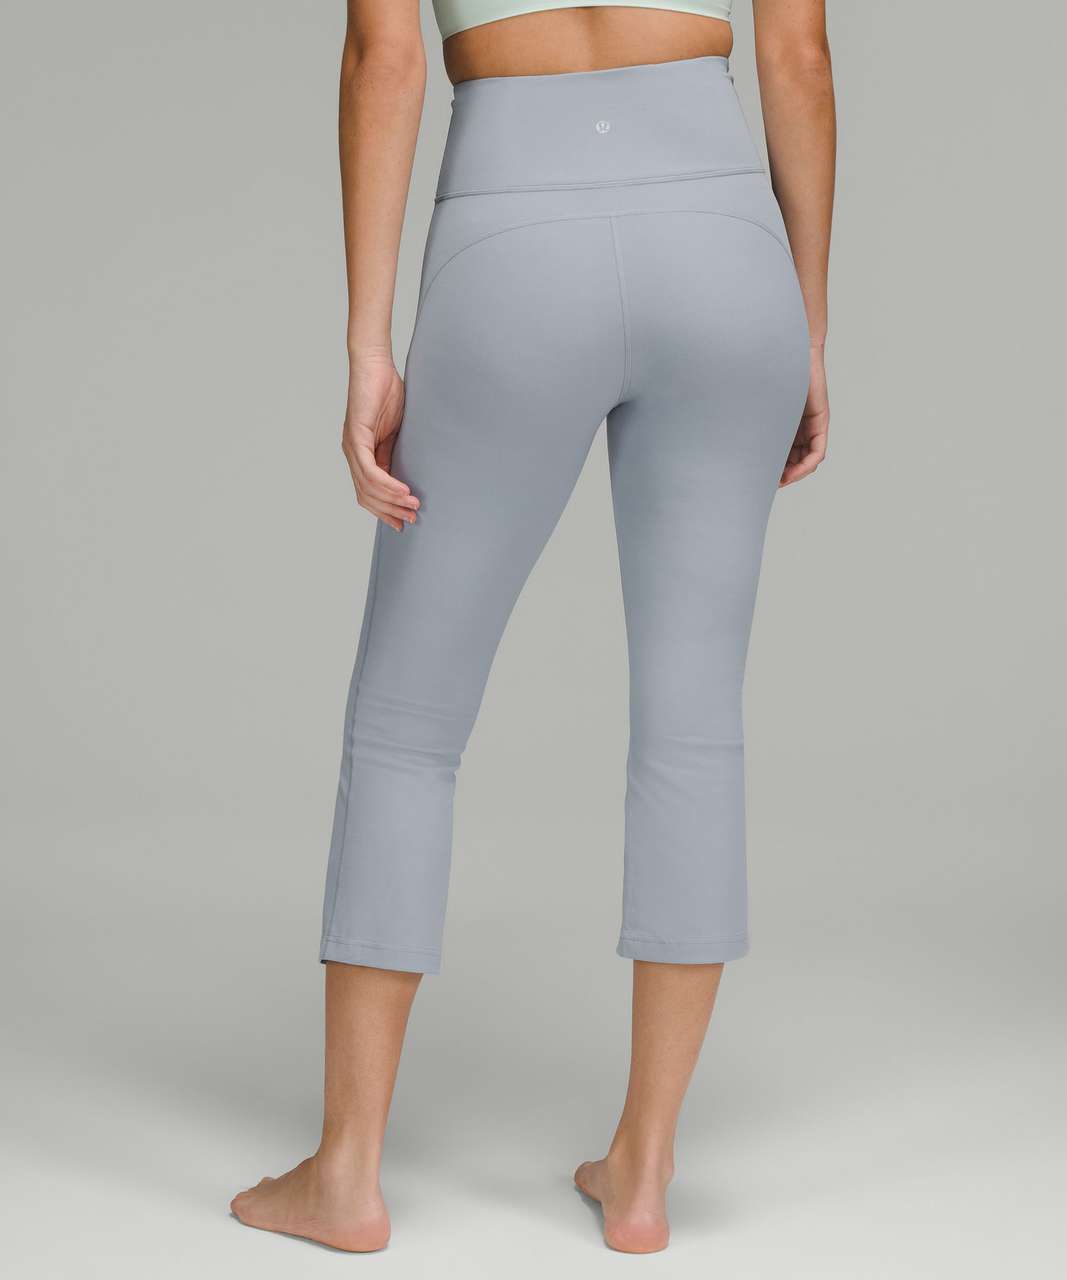 Lululemon Groove Super-High-Rise Crop 23" - Chambray